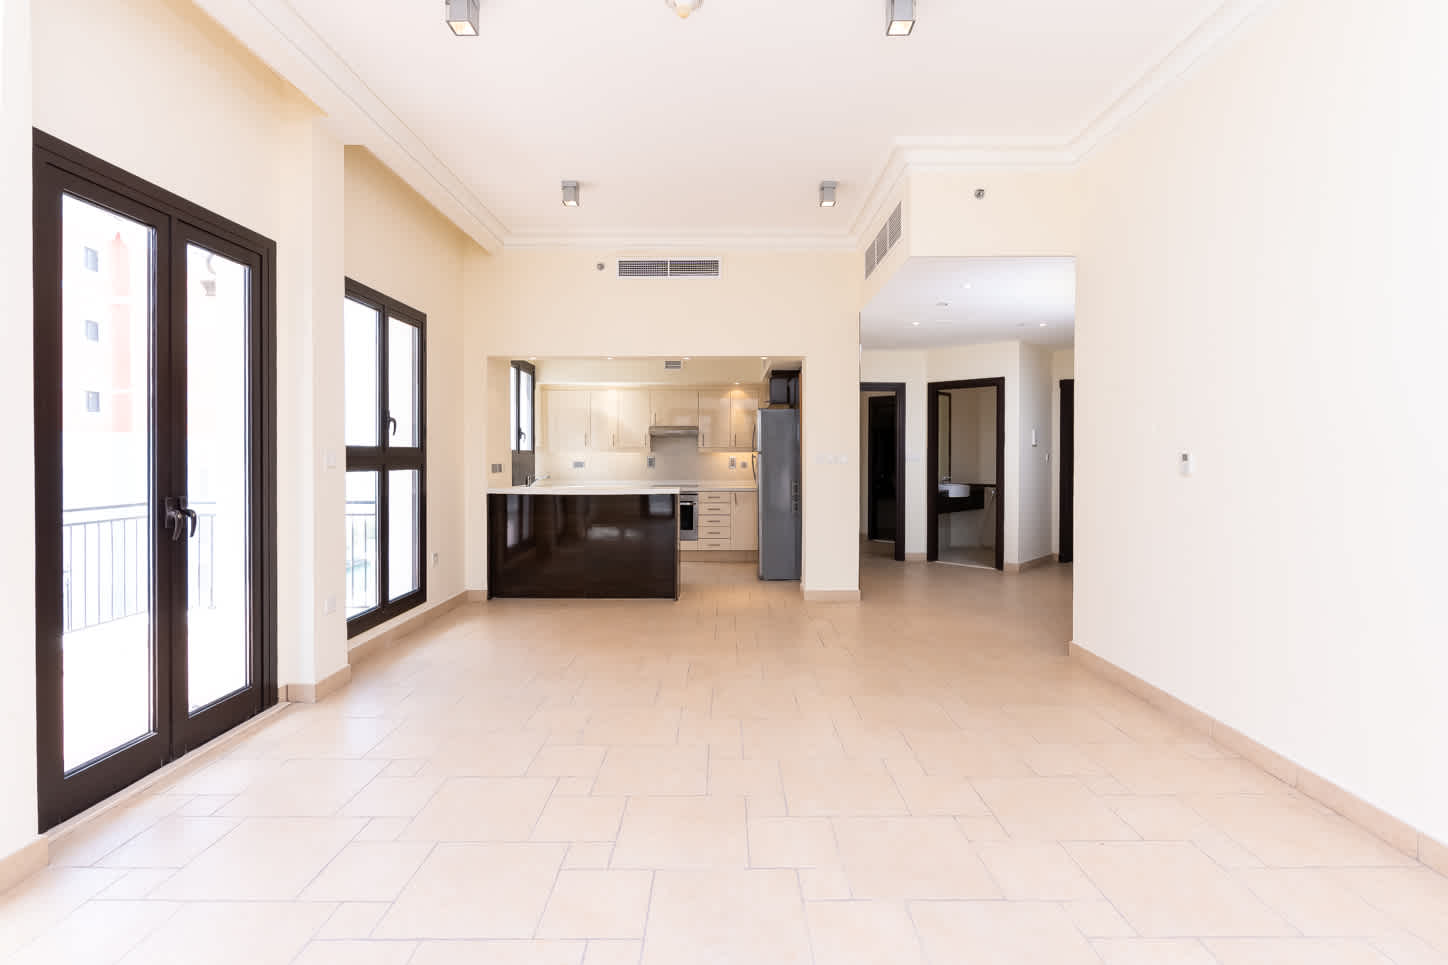 25 Spaces Real Estate - Qanat quartier - Properties for Sale - 18 May 2022 (ref APT25197)5